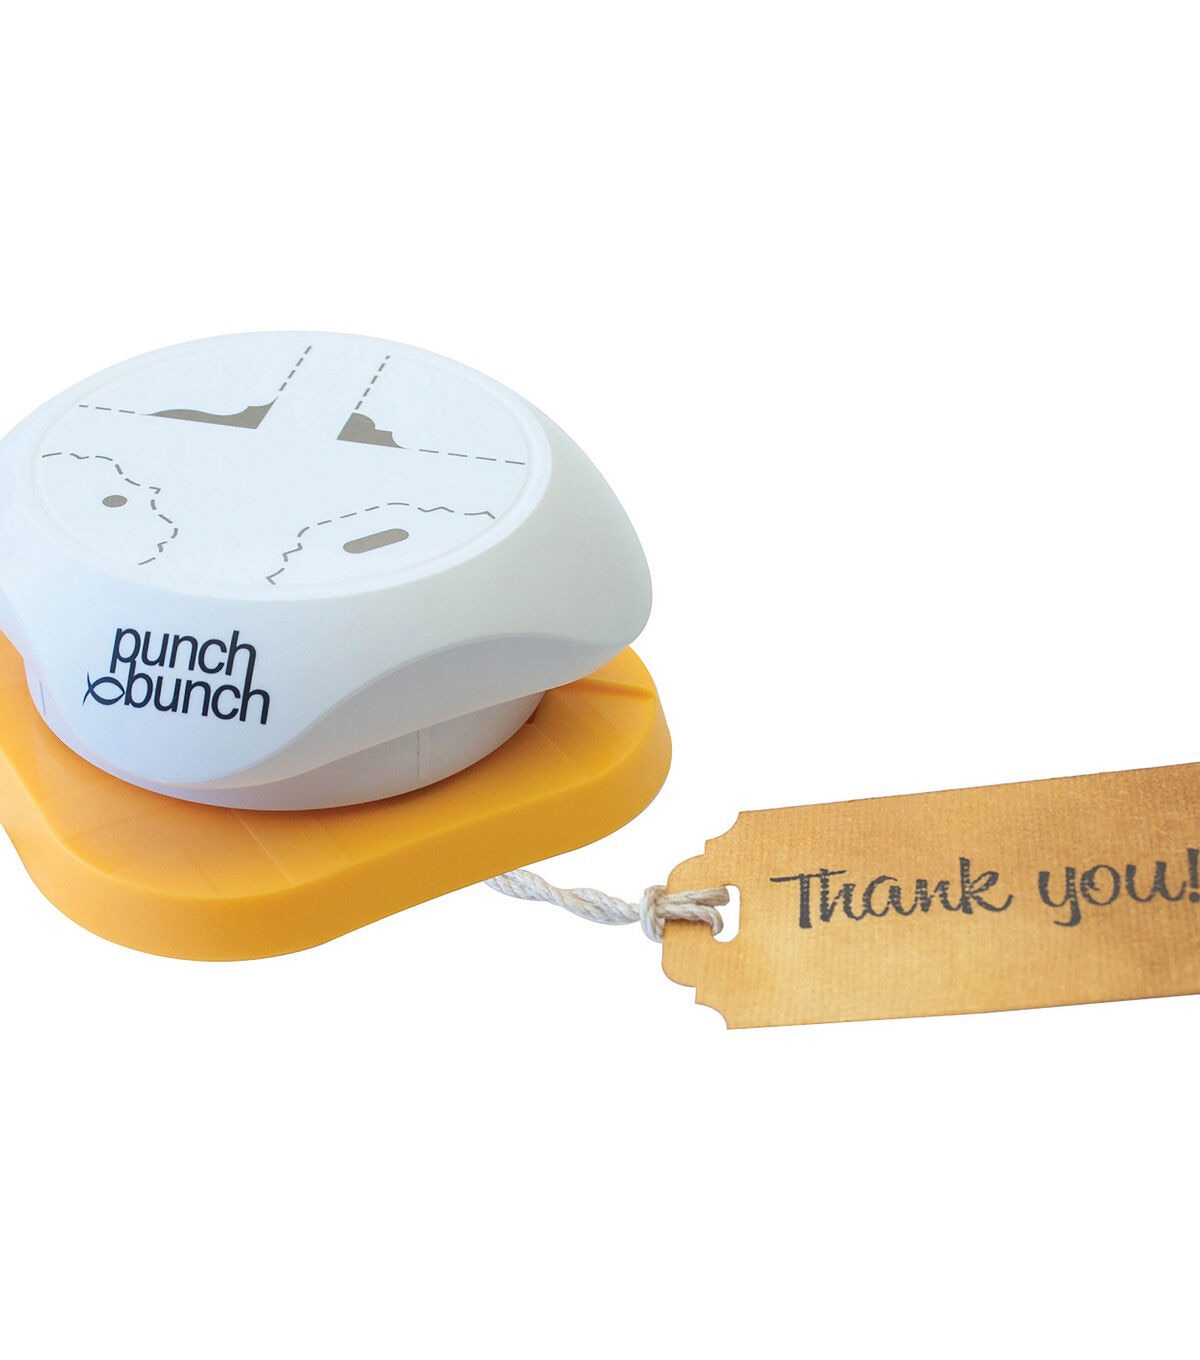 Punch Bunch AnySize Elegant Tag Maker 4 In 1 Corner And Hole Punch